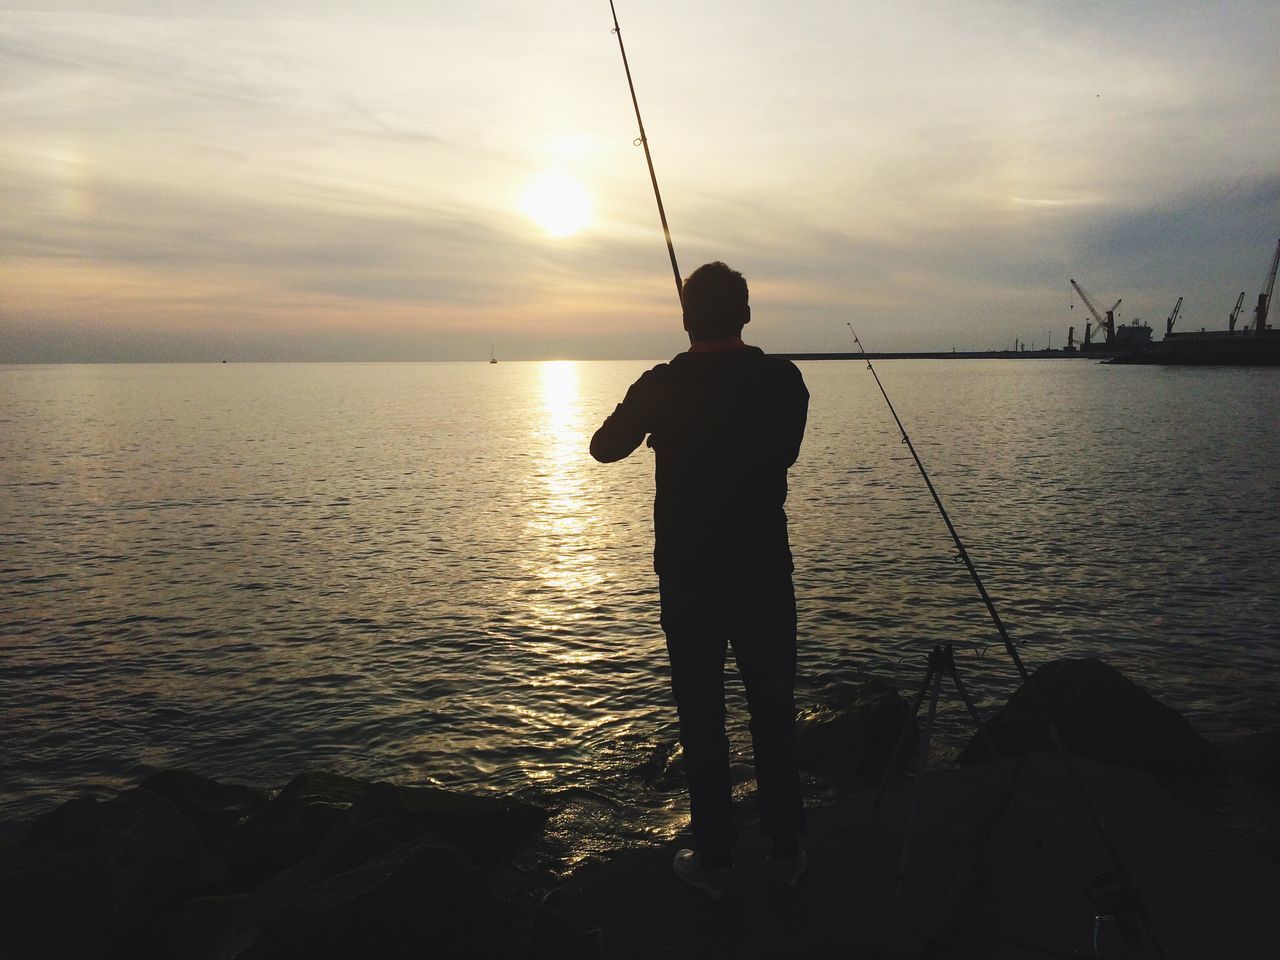 sunset, water, silhouette, sky, sea, sun, lifestyles, leisure activity, standing, reflection, men, scenics, tranquility, fishing rod, beauty in nature, tranquil scene, cloud - sky, nature